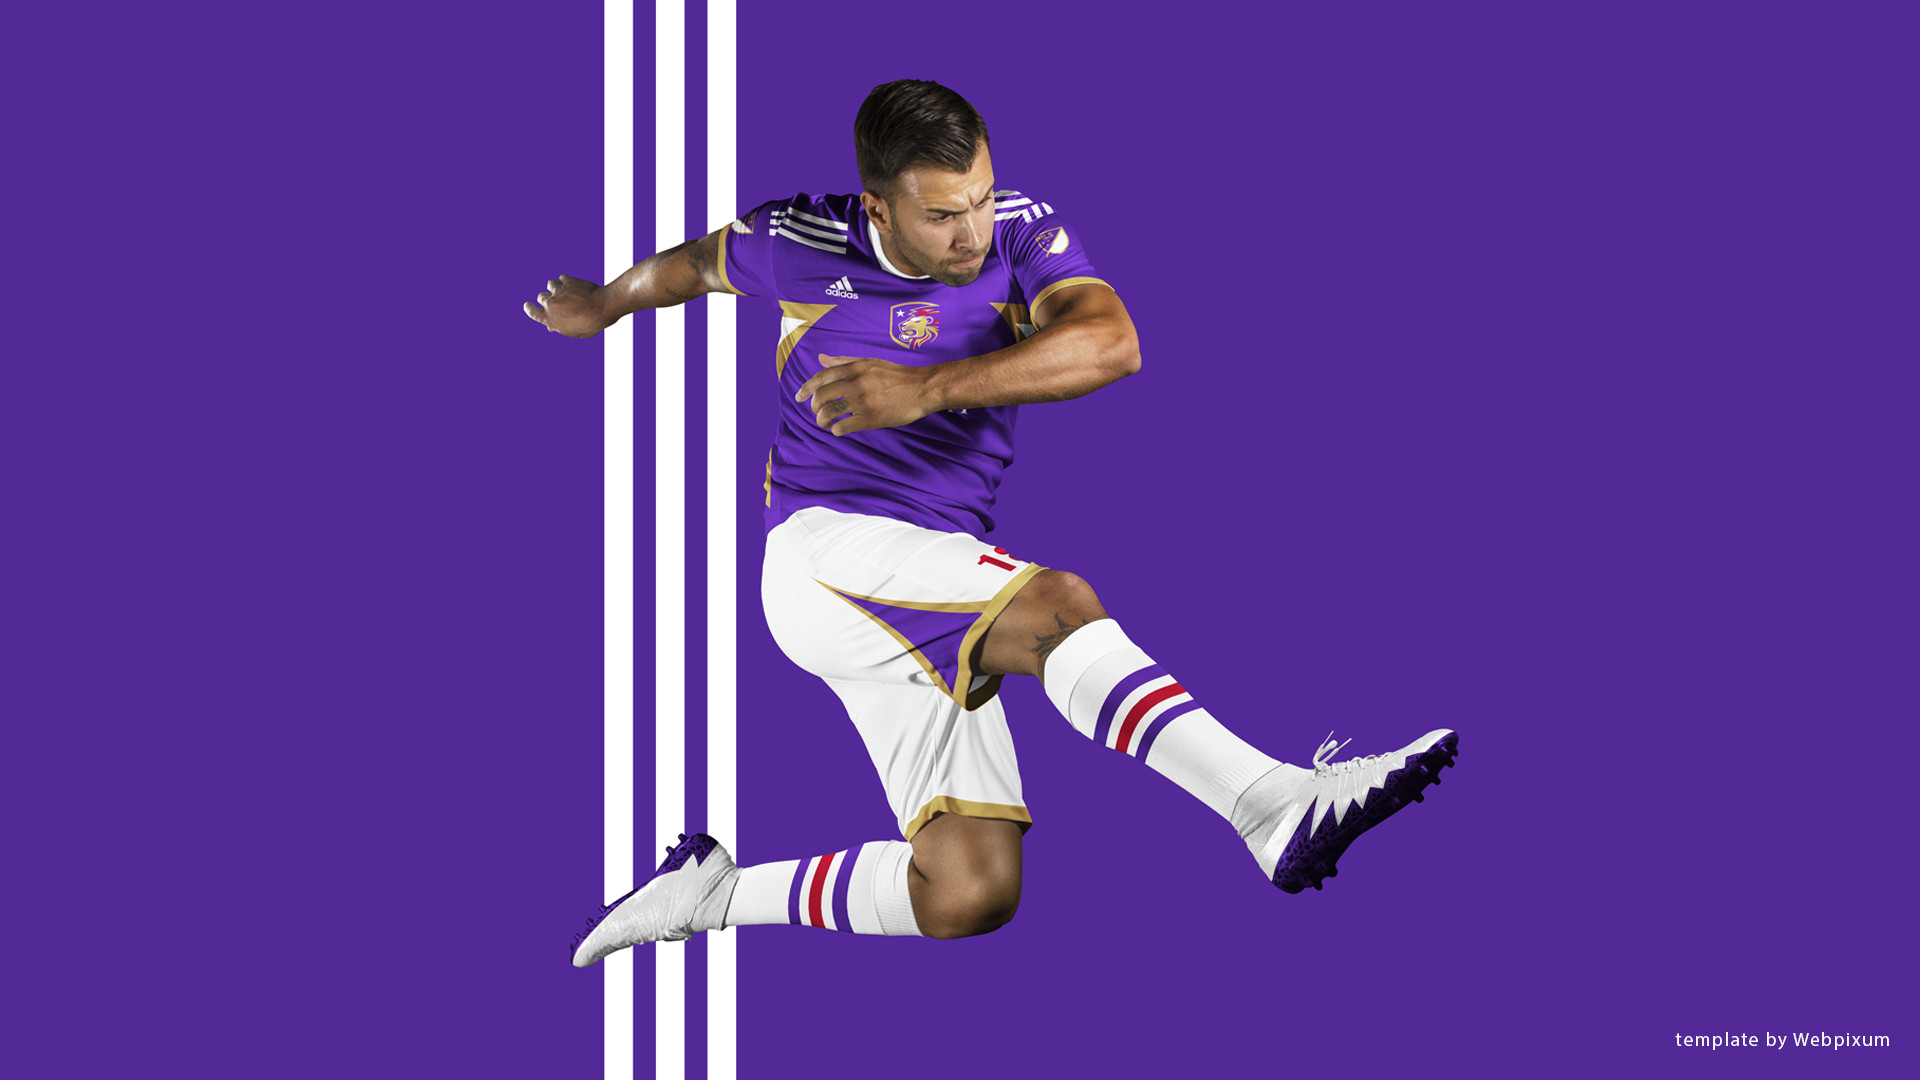 1920x1080 I arrived at “CITY PRIDE” and I really liked it because it blends the team  name (Orlando City) with the mascot concept together well.